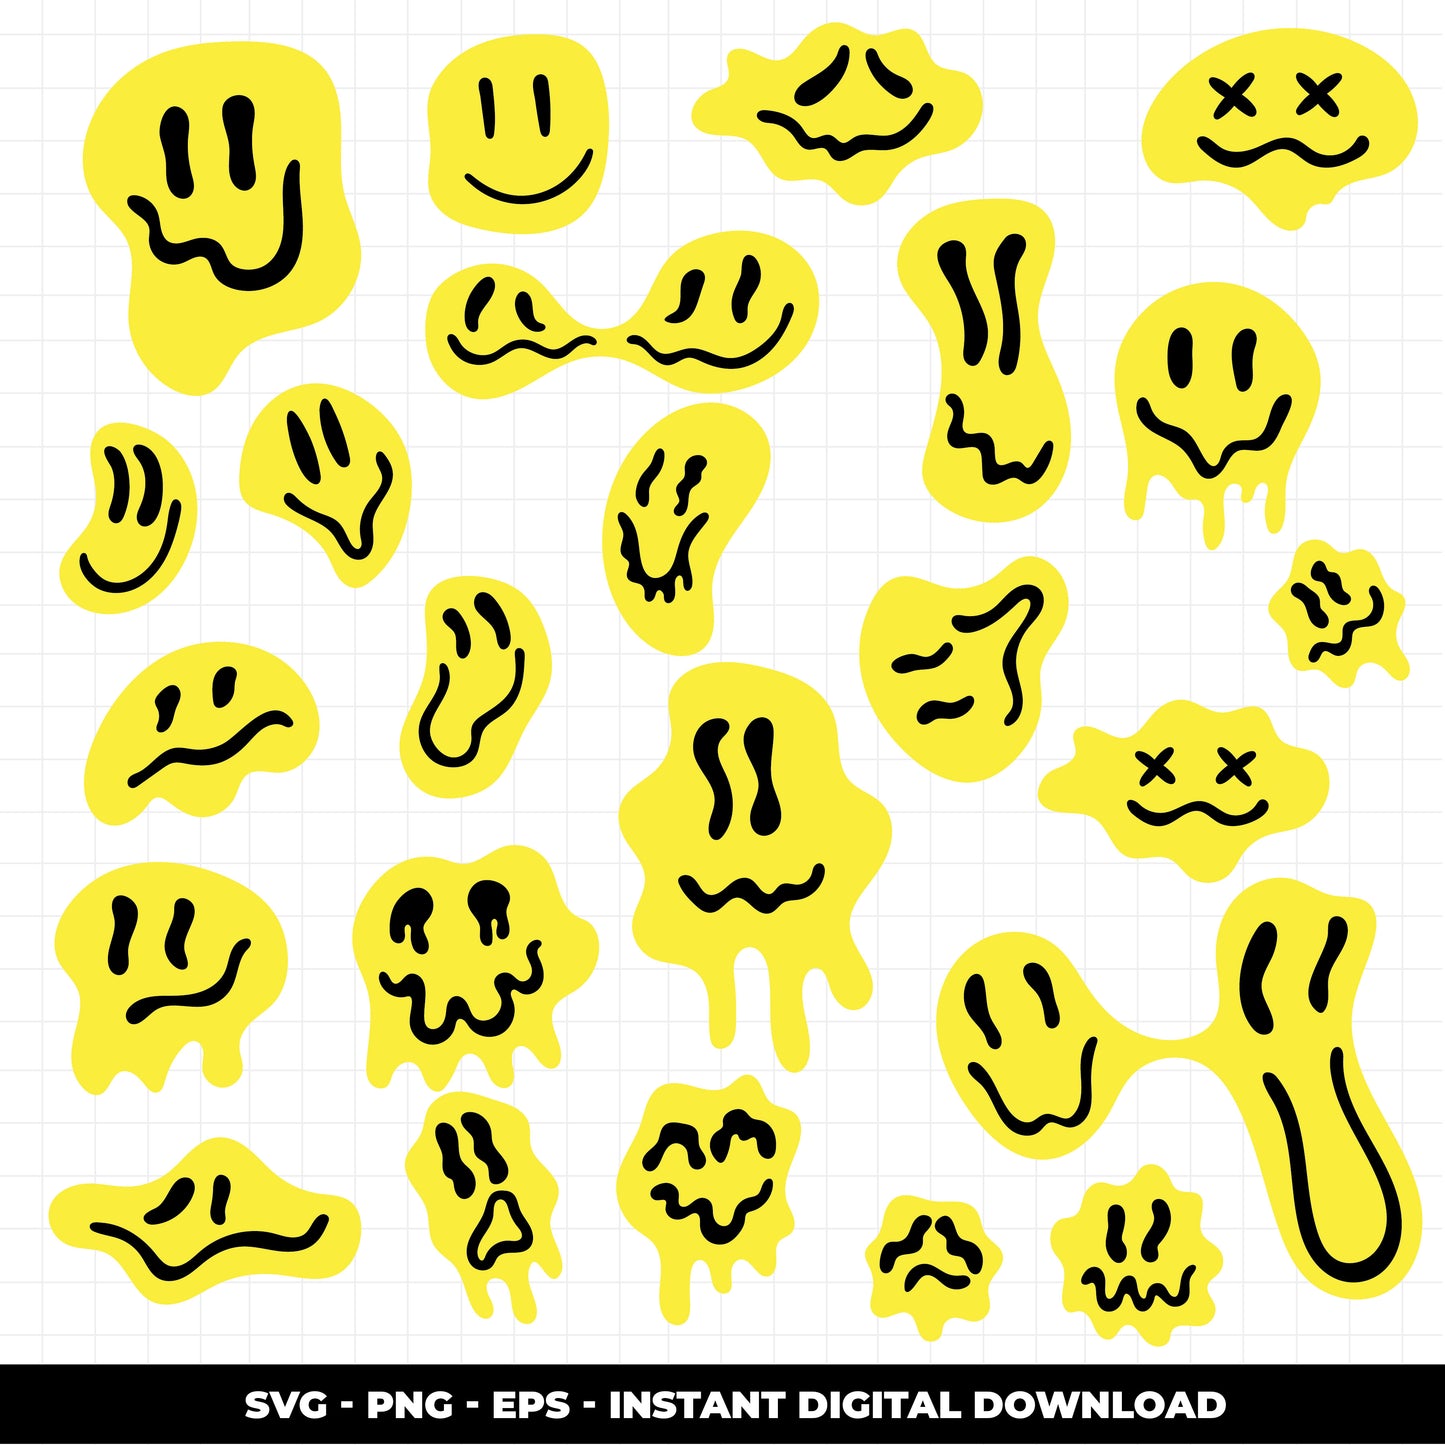 COD1413 - Melted Face cliparts /Melt Smiley Face/ Happy Face Drip Doodle/face png/70's cliparts